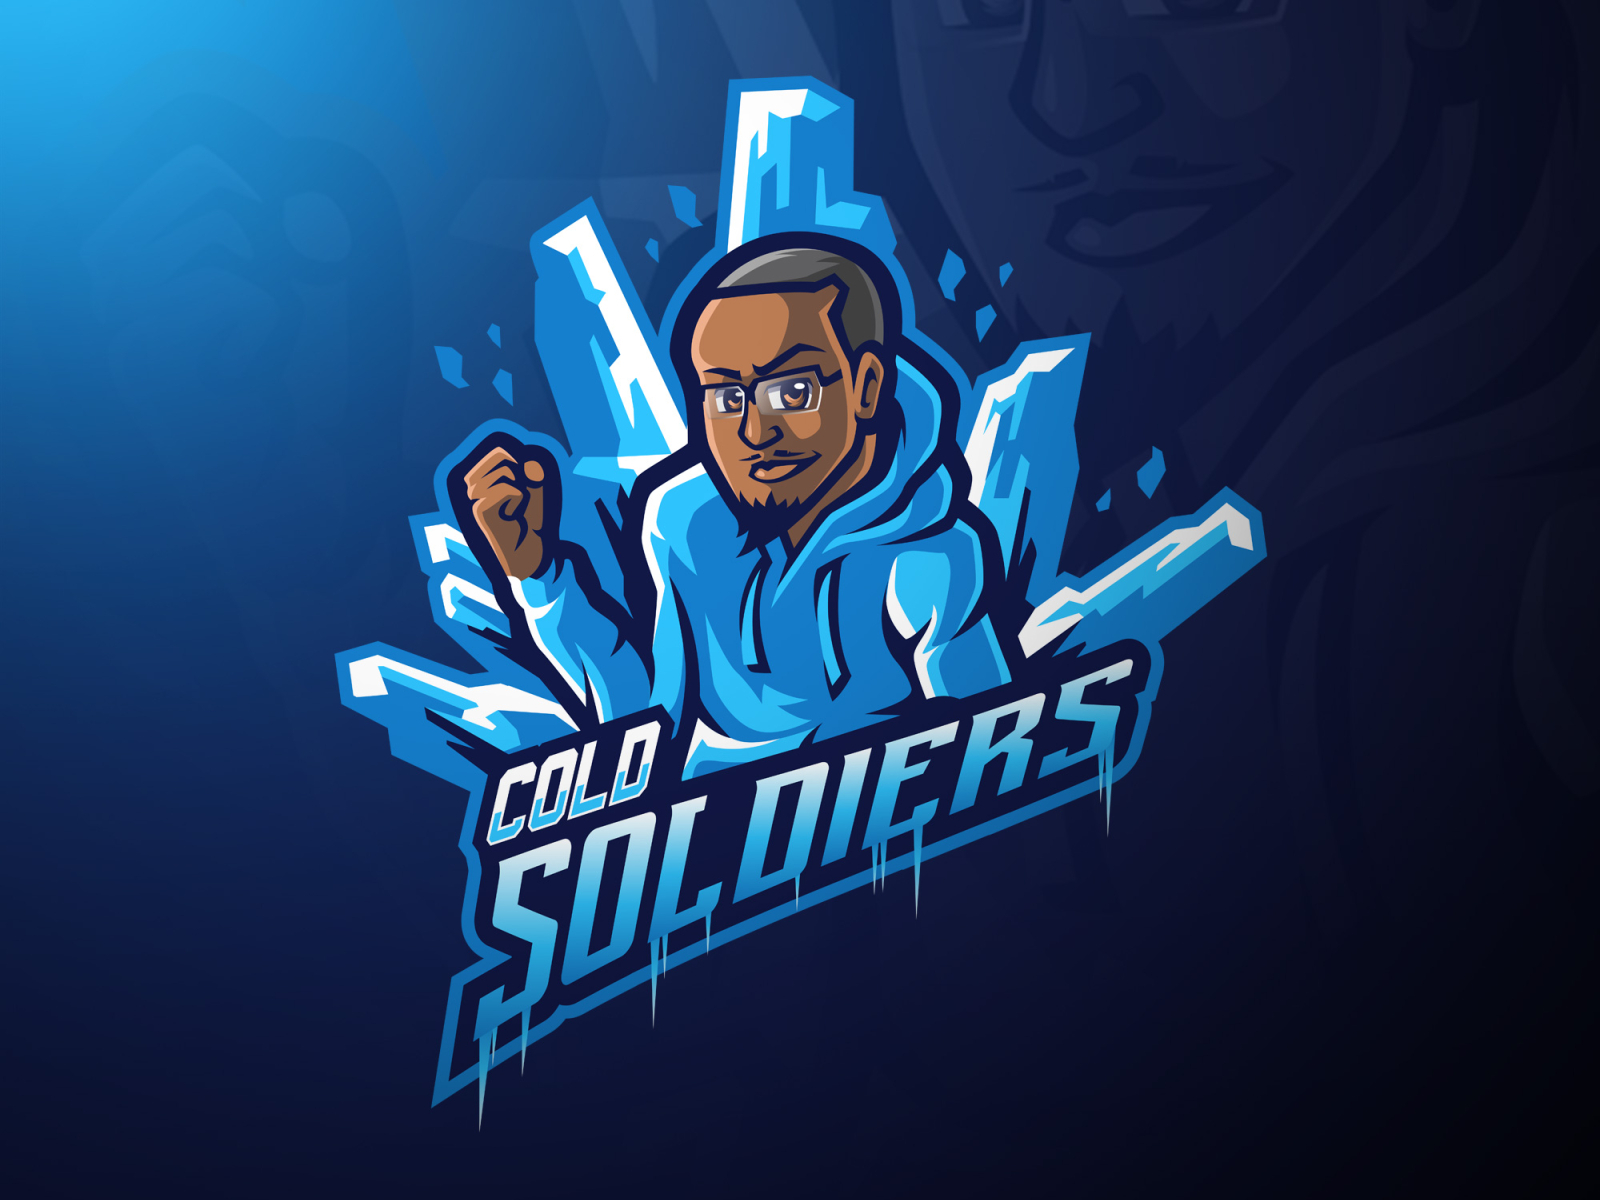 Cold Soldiers Portrait Mascot logo by MrvnDesigns on Dribbble